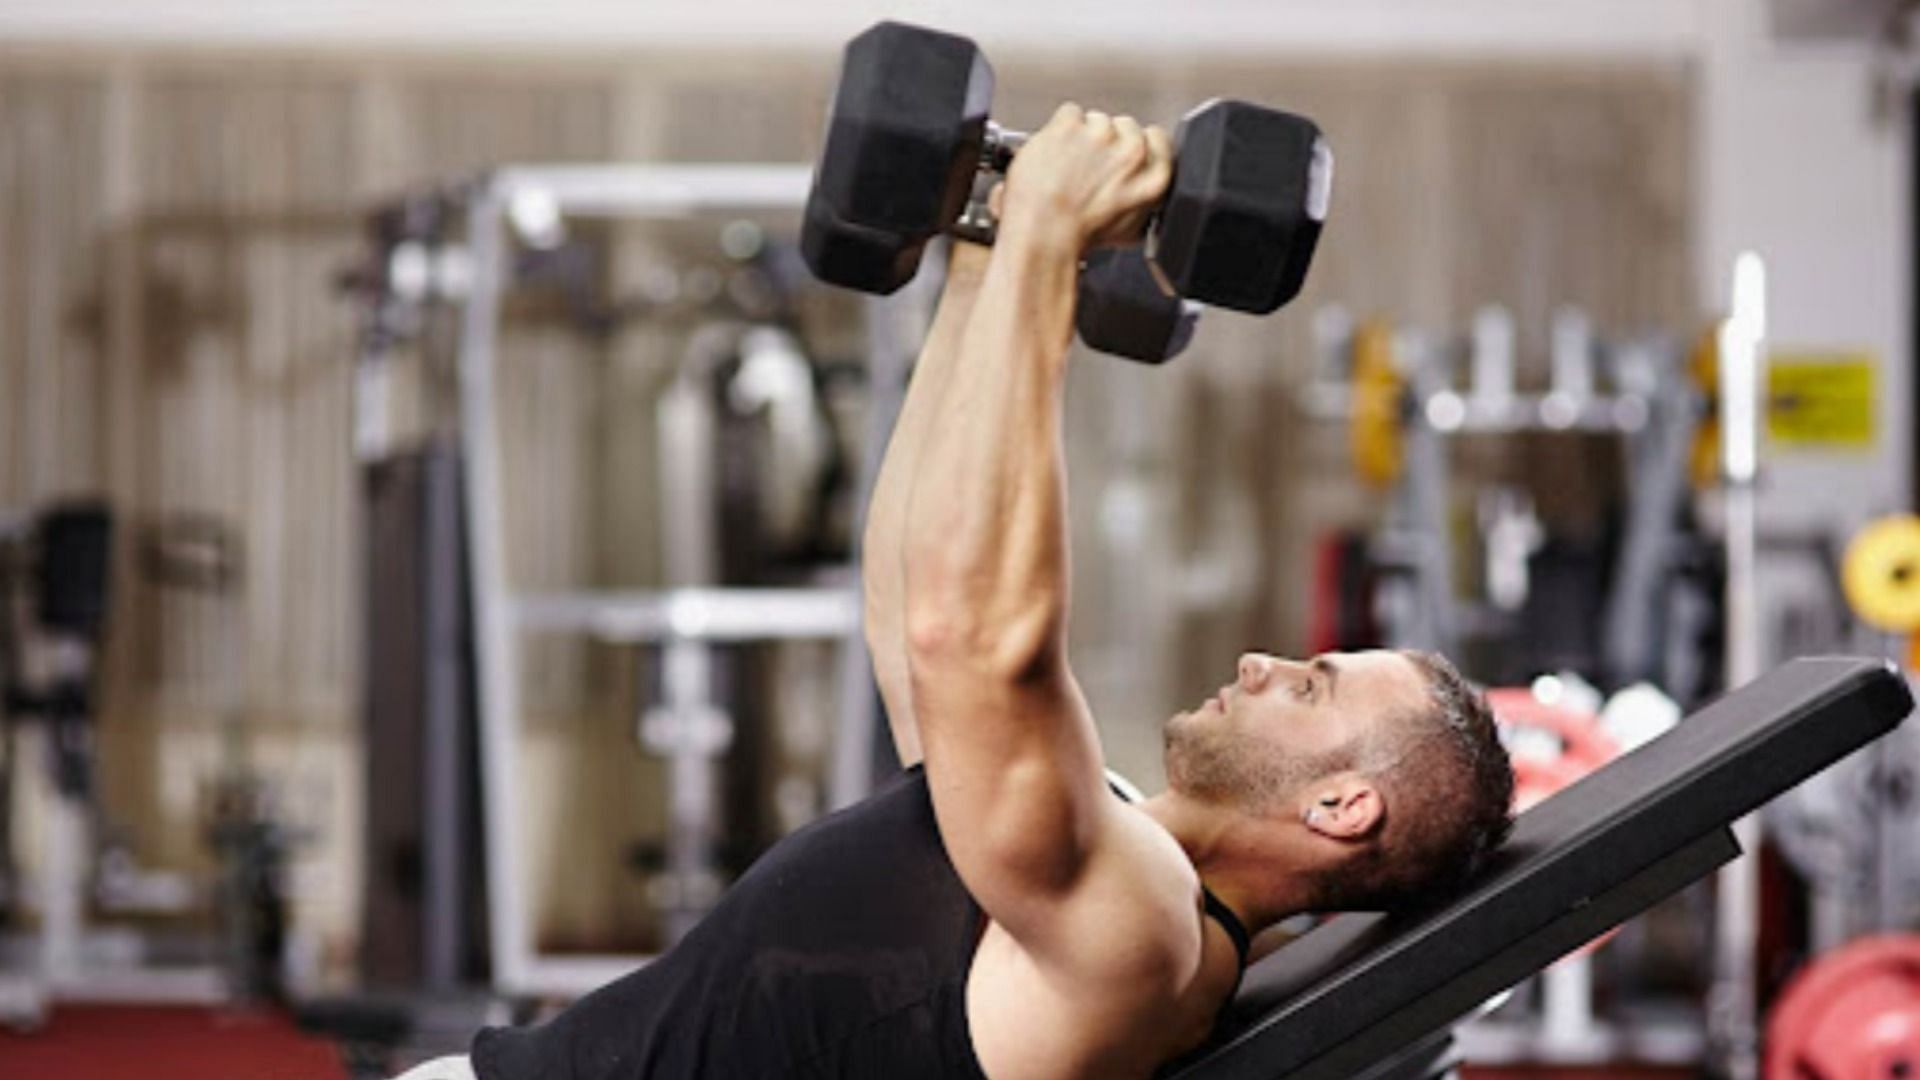 Incline chest flyes can take your workouts to the next level.